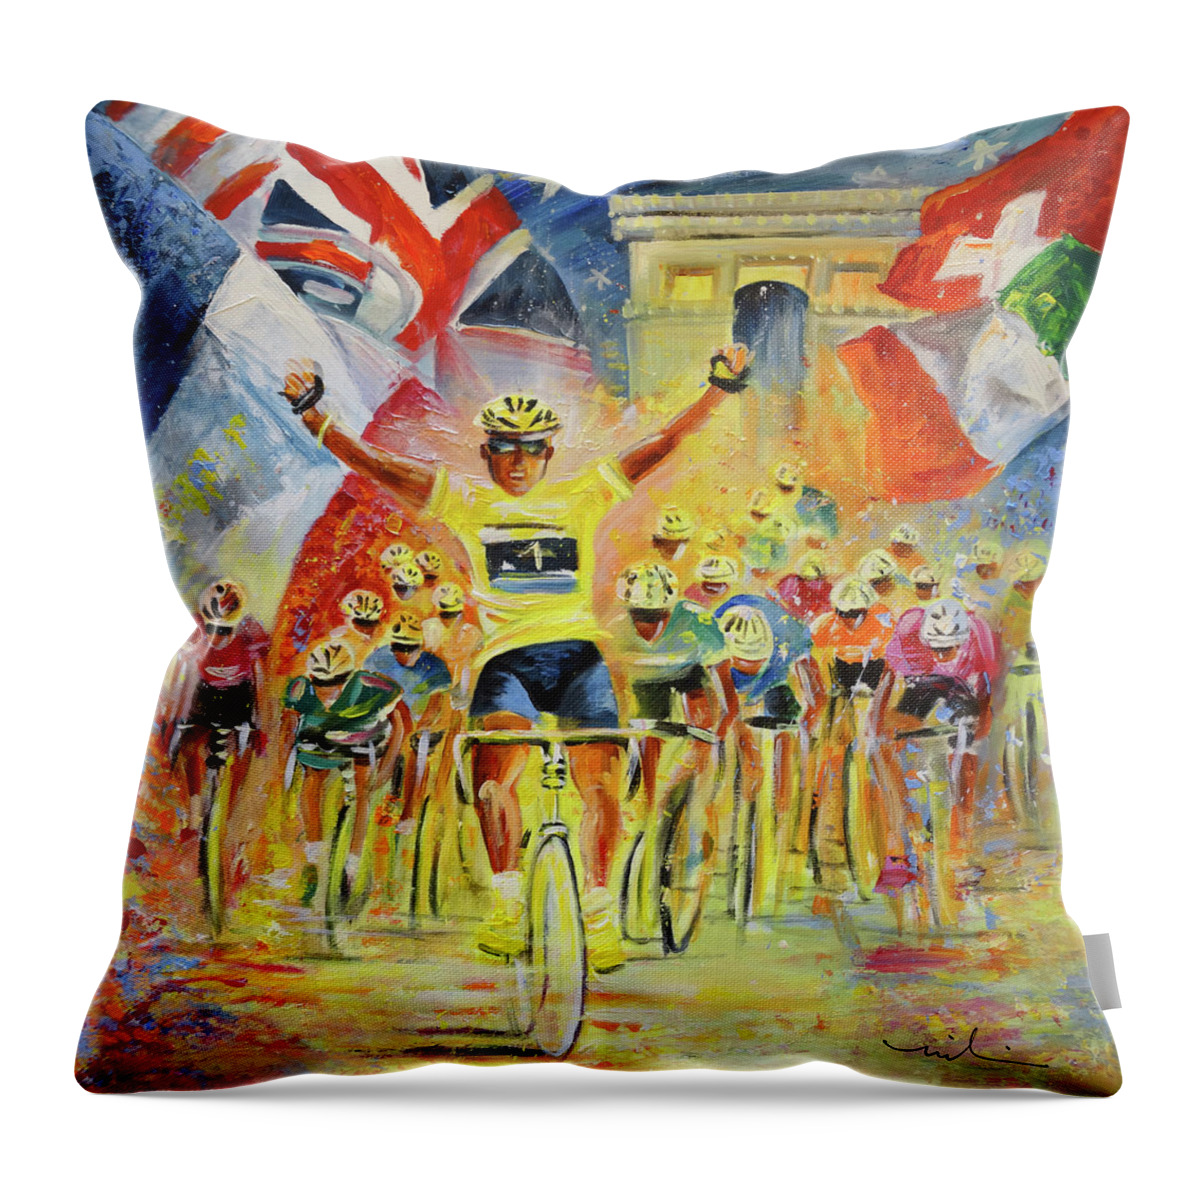 Sports Throw Pillow featuring the painting The Winner Of The Tour De France by Miki De Goodaboom